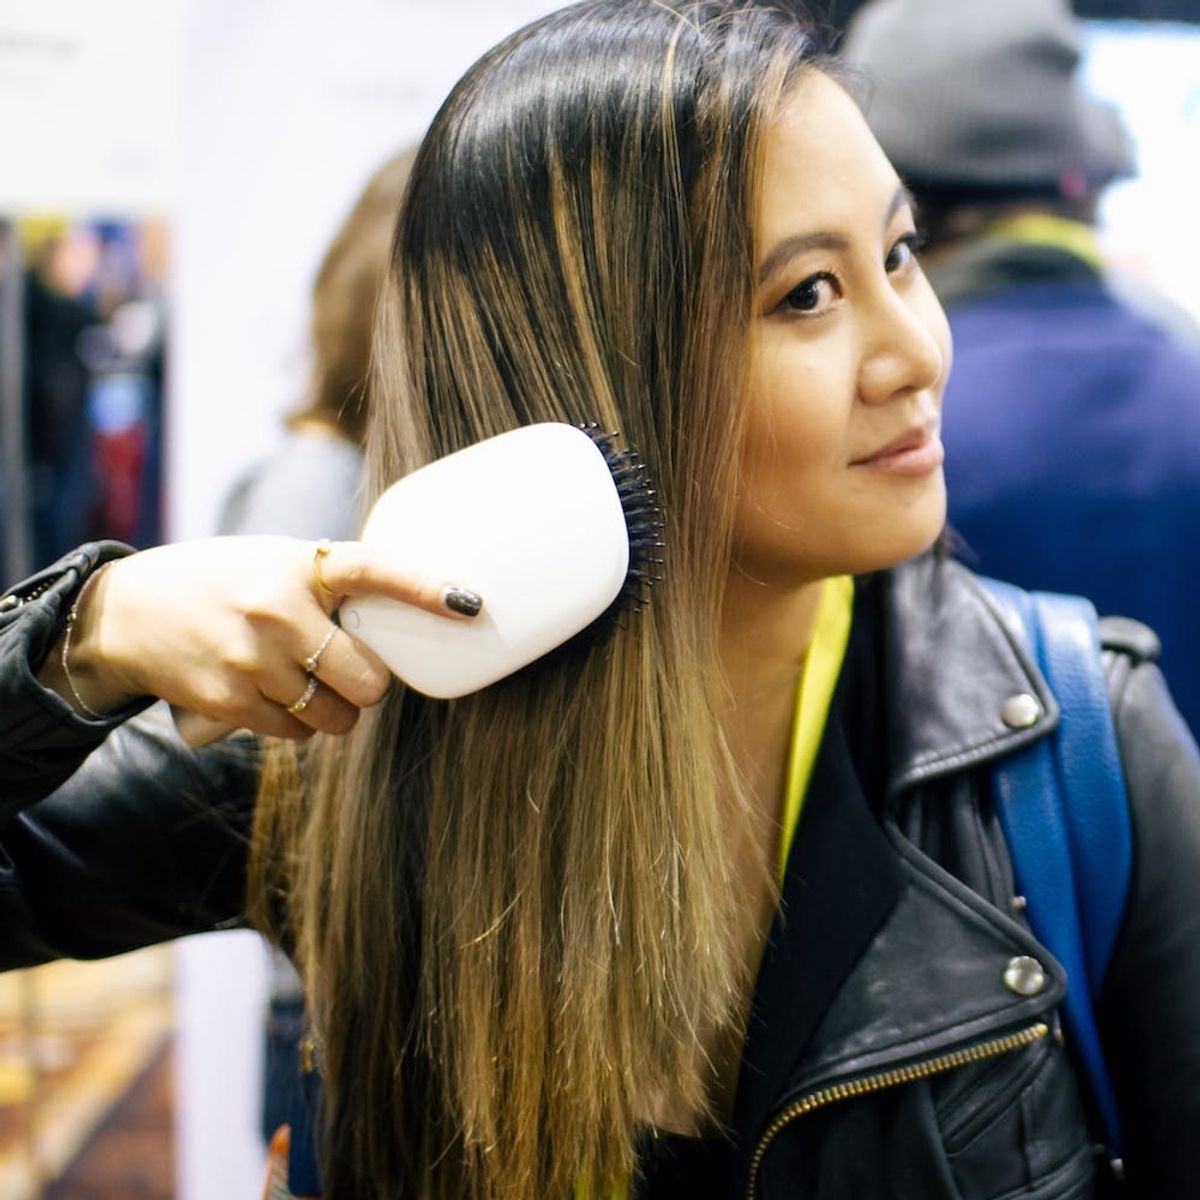 This Smart Hairbrush Can Hear Your Hair Breaking